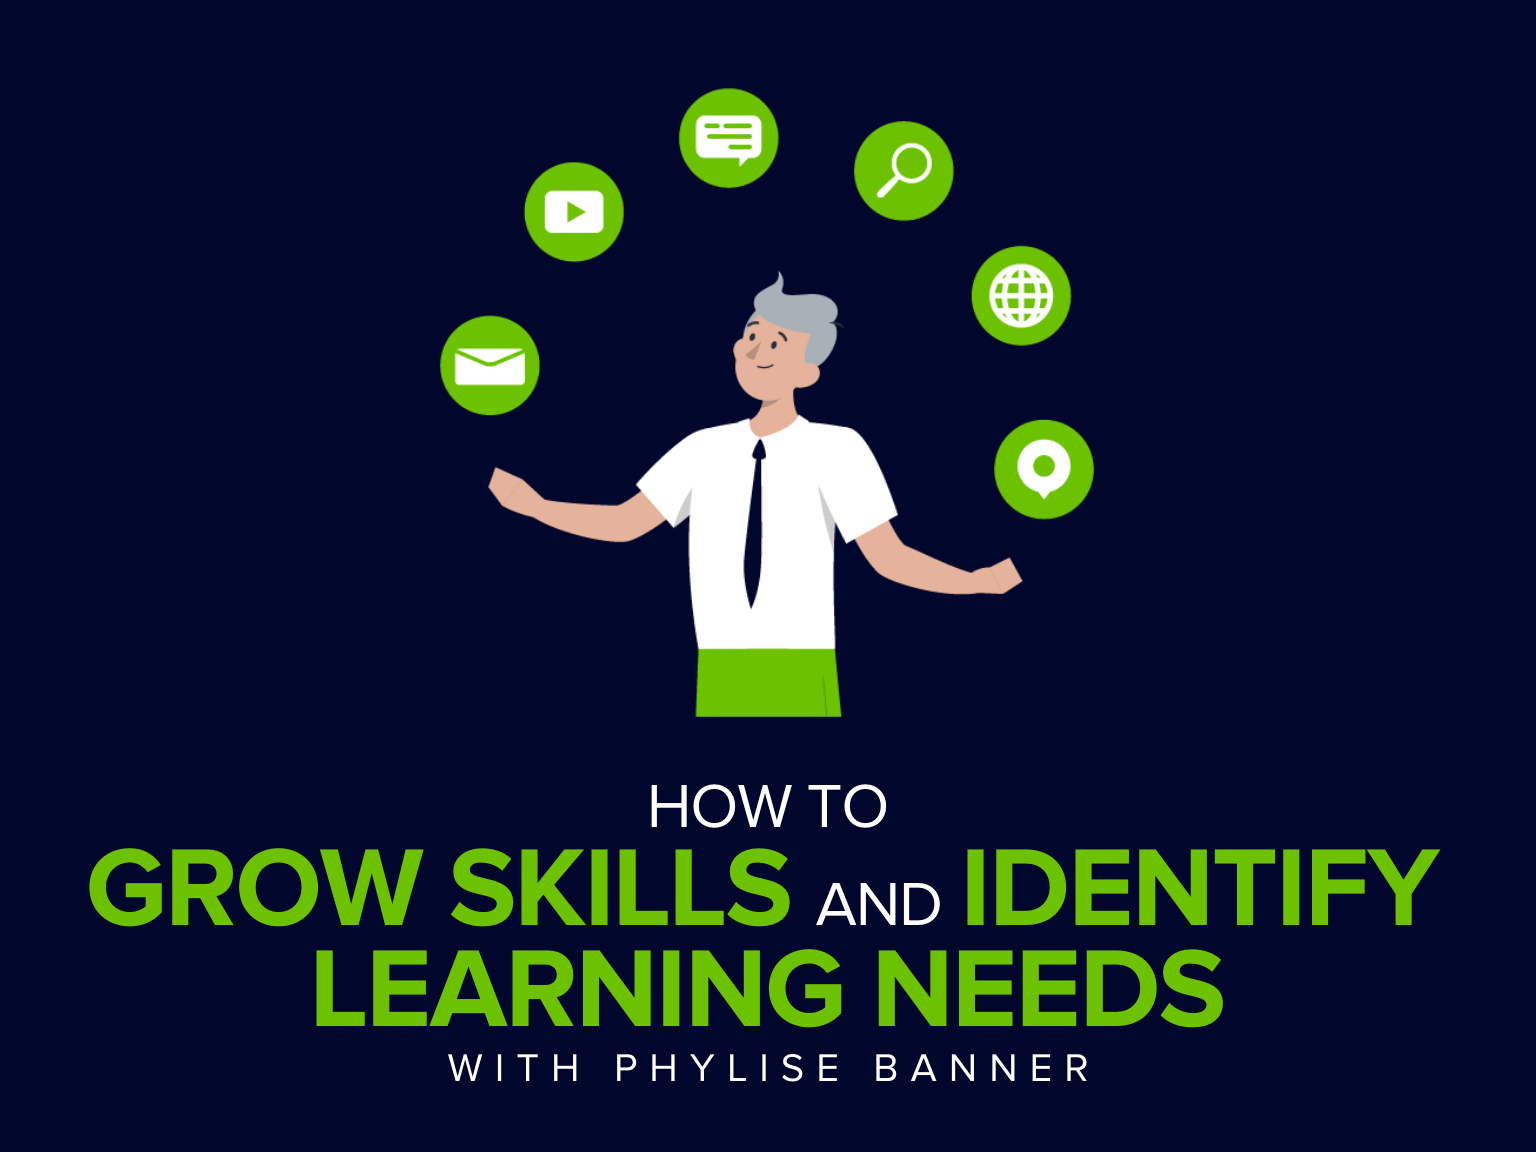 How to Grow Skills and Identify Learning Needs with Phylise Banner